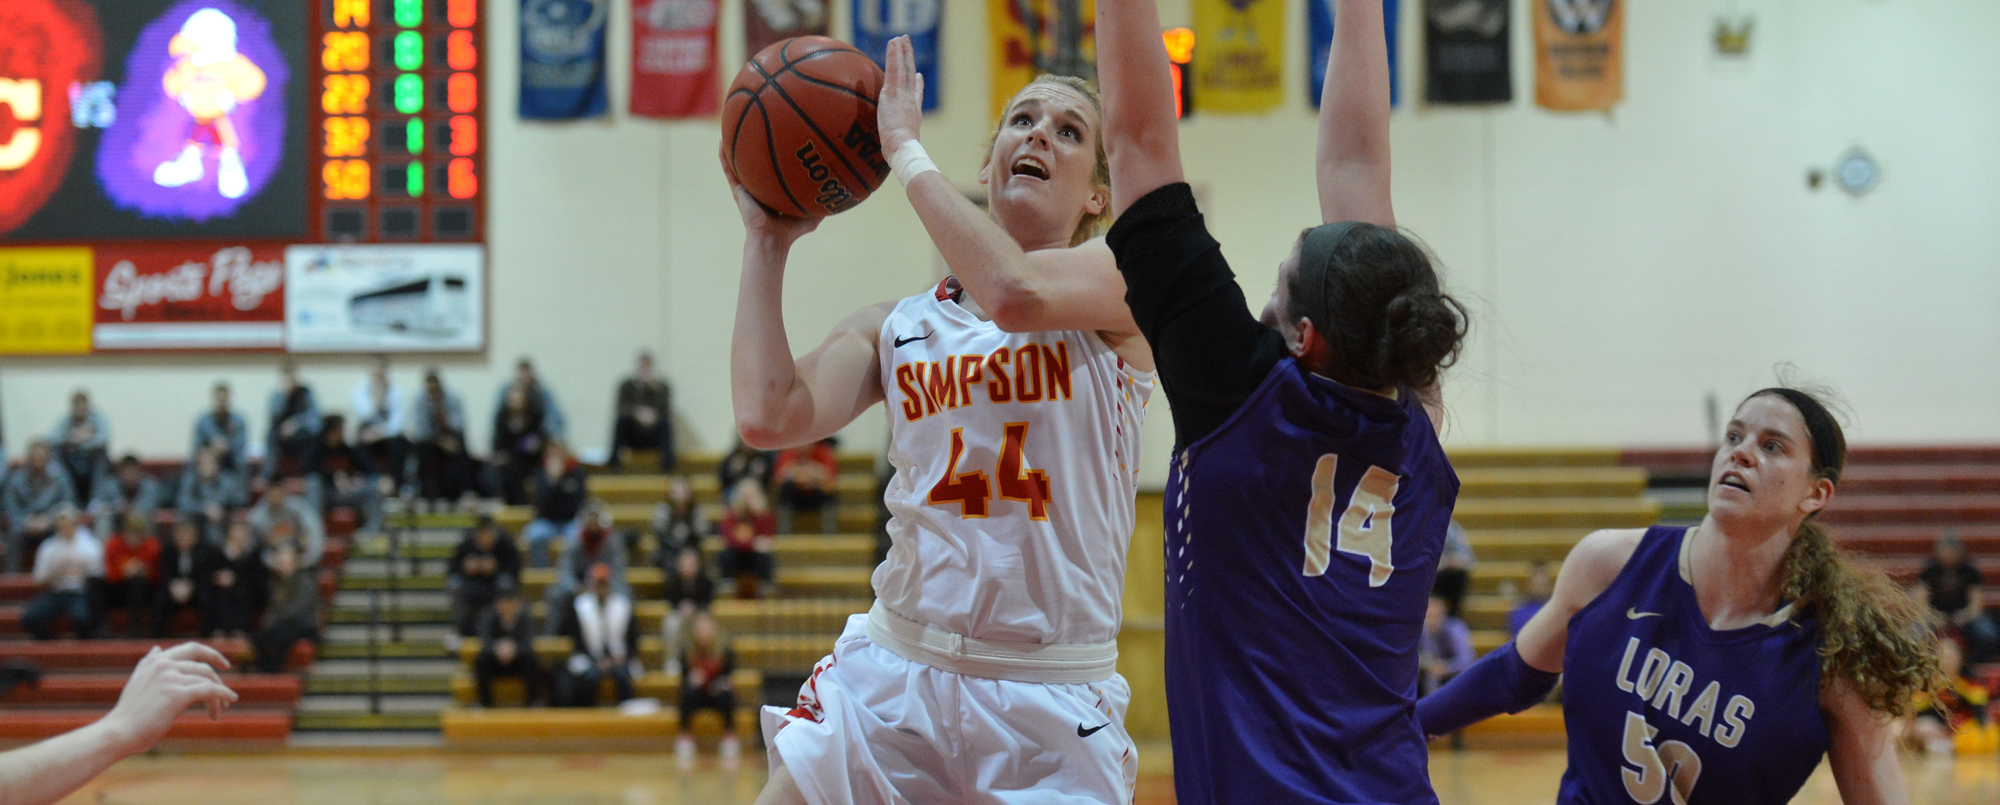 Maddie Simmons scored a career-high 17 points in Simpson's 80-63 loss to Loras on Jan. 25.